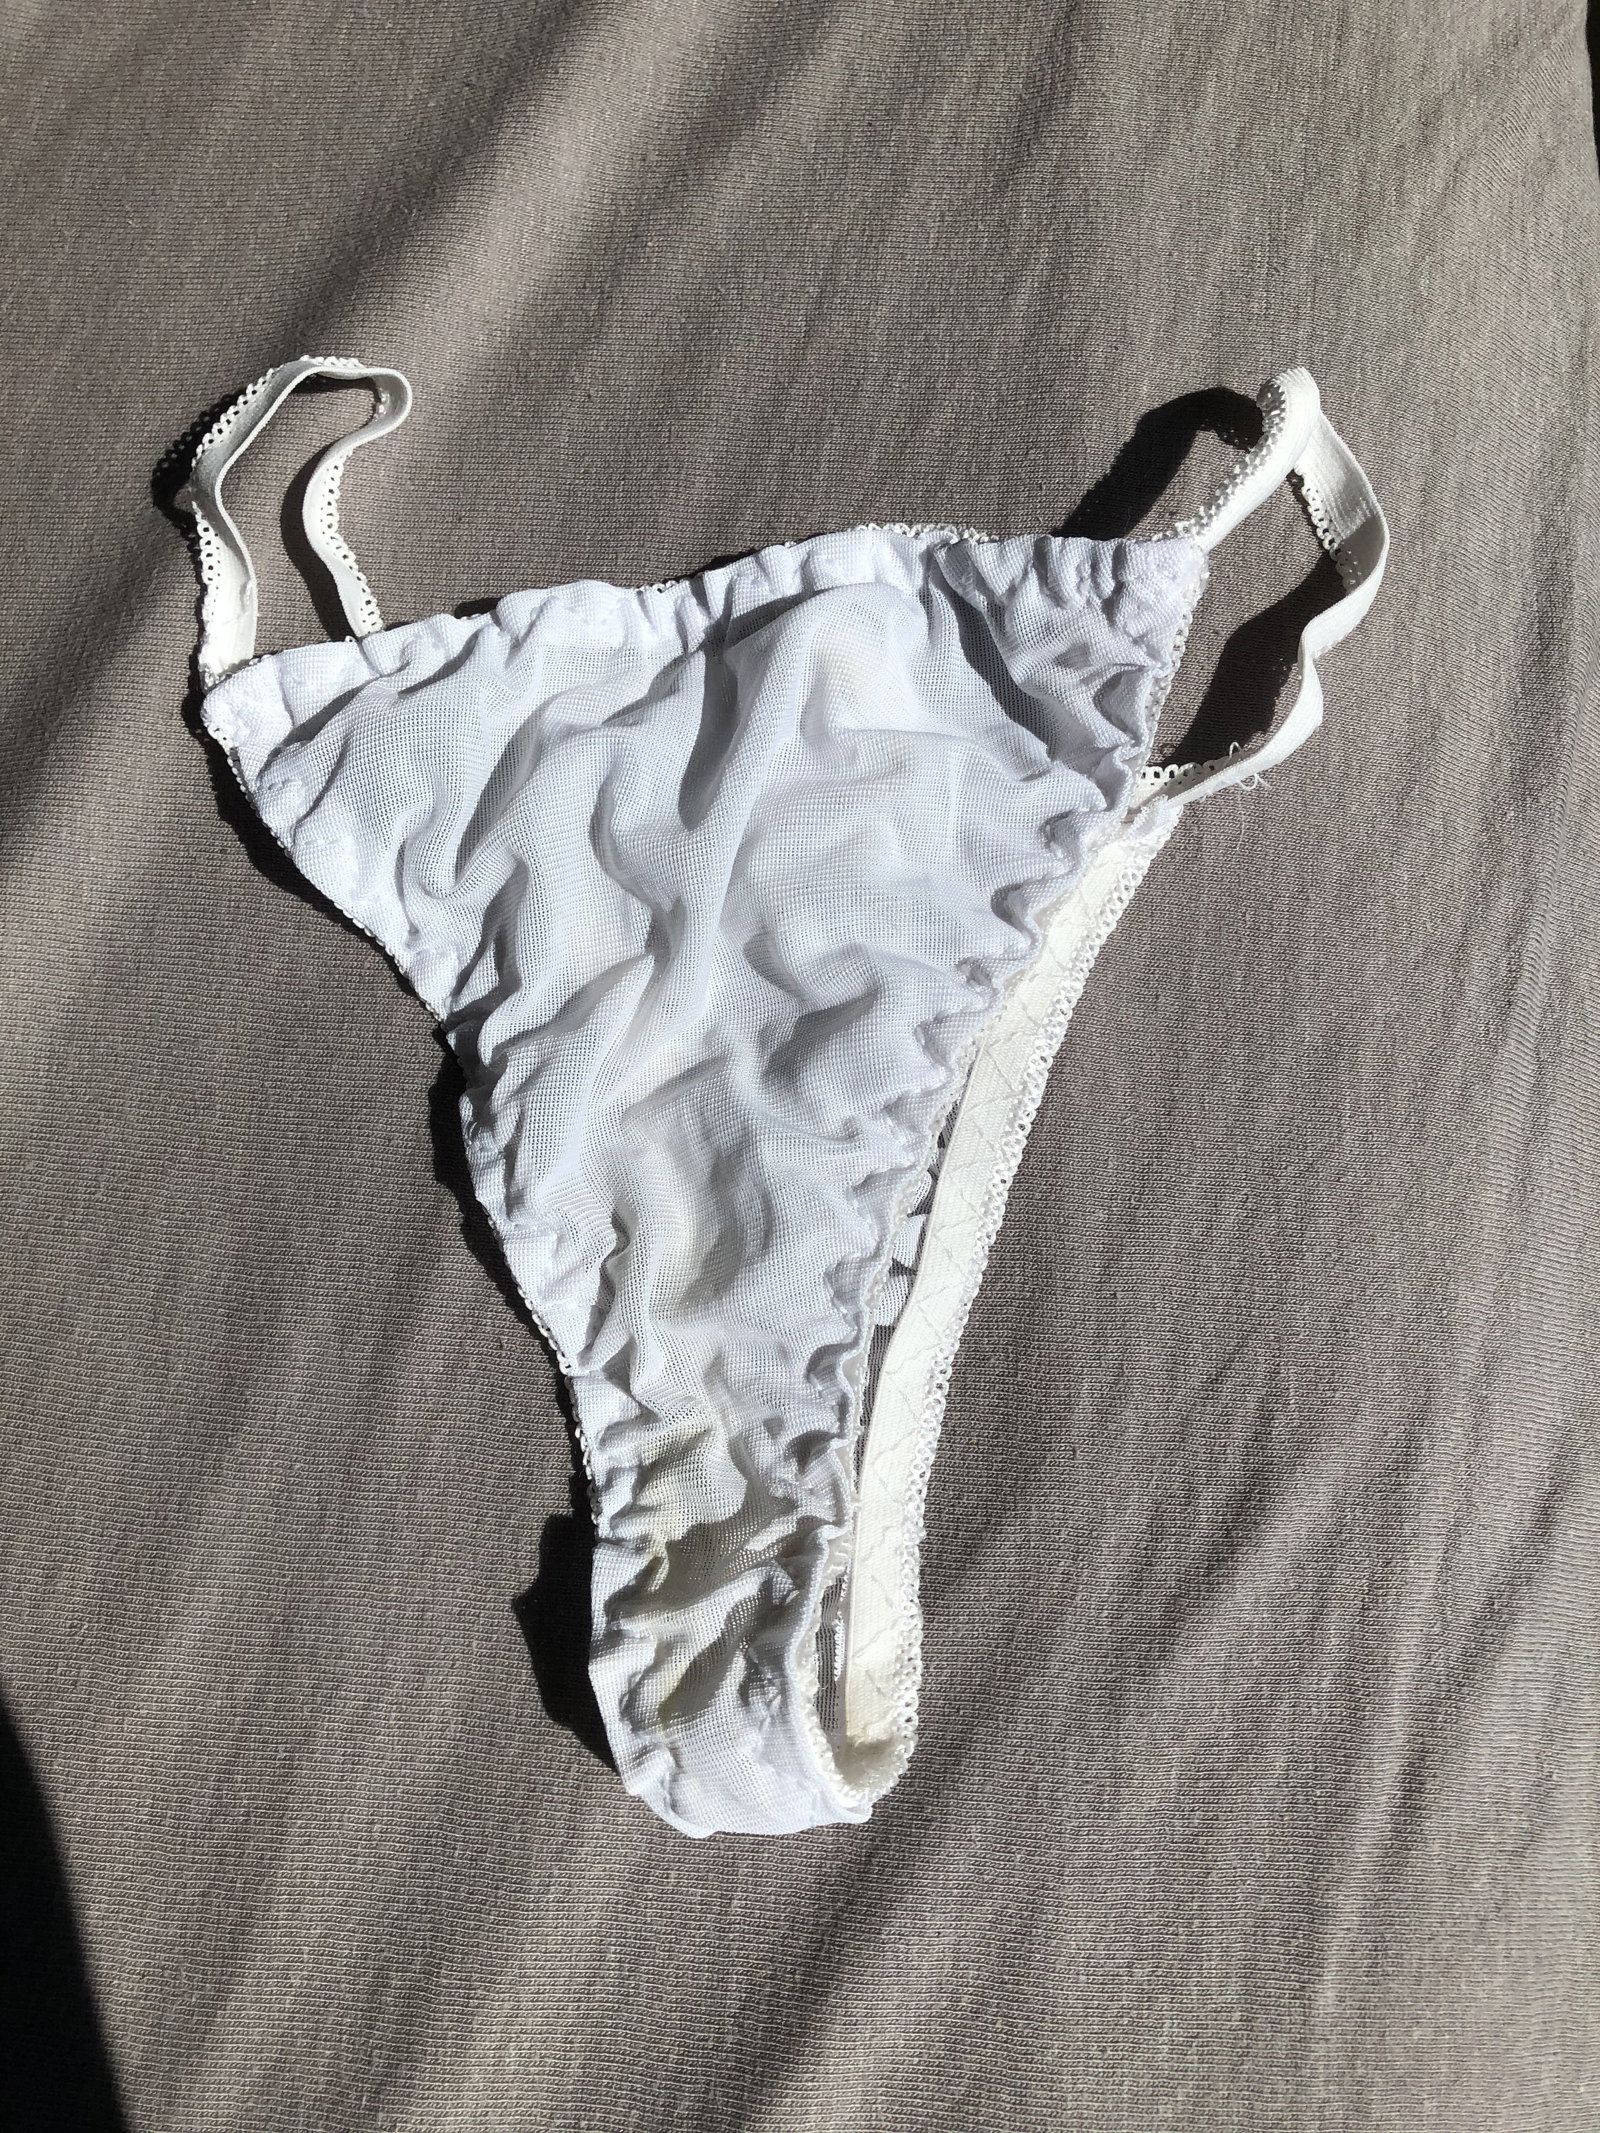 Watch the Photo by MissLucixoxo with the username @MissLucixoxo, who is a star user, posted on September 11, 2020. The post is about the topic WettyPanty’s. and the text says 'any wetty panty lovers?'